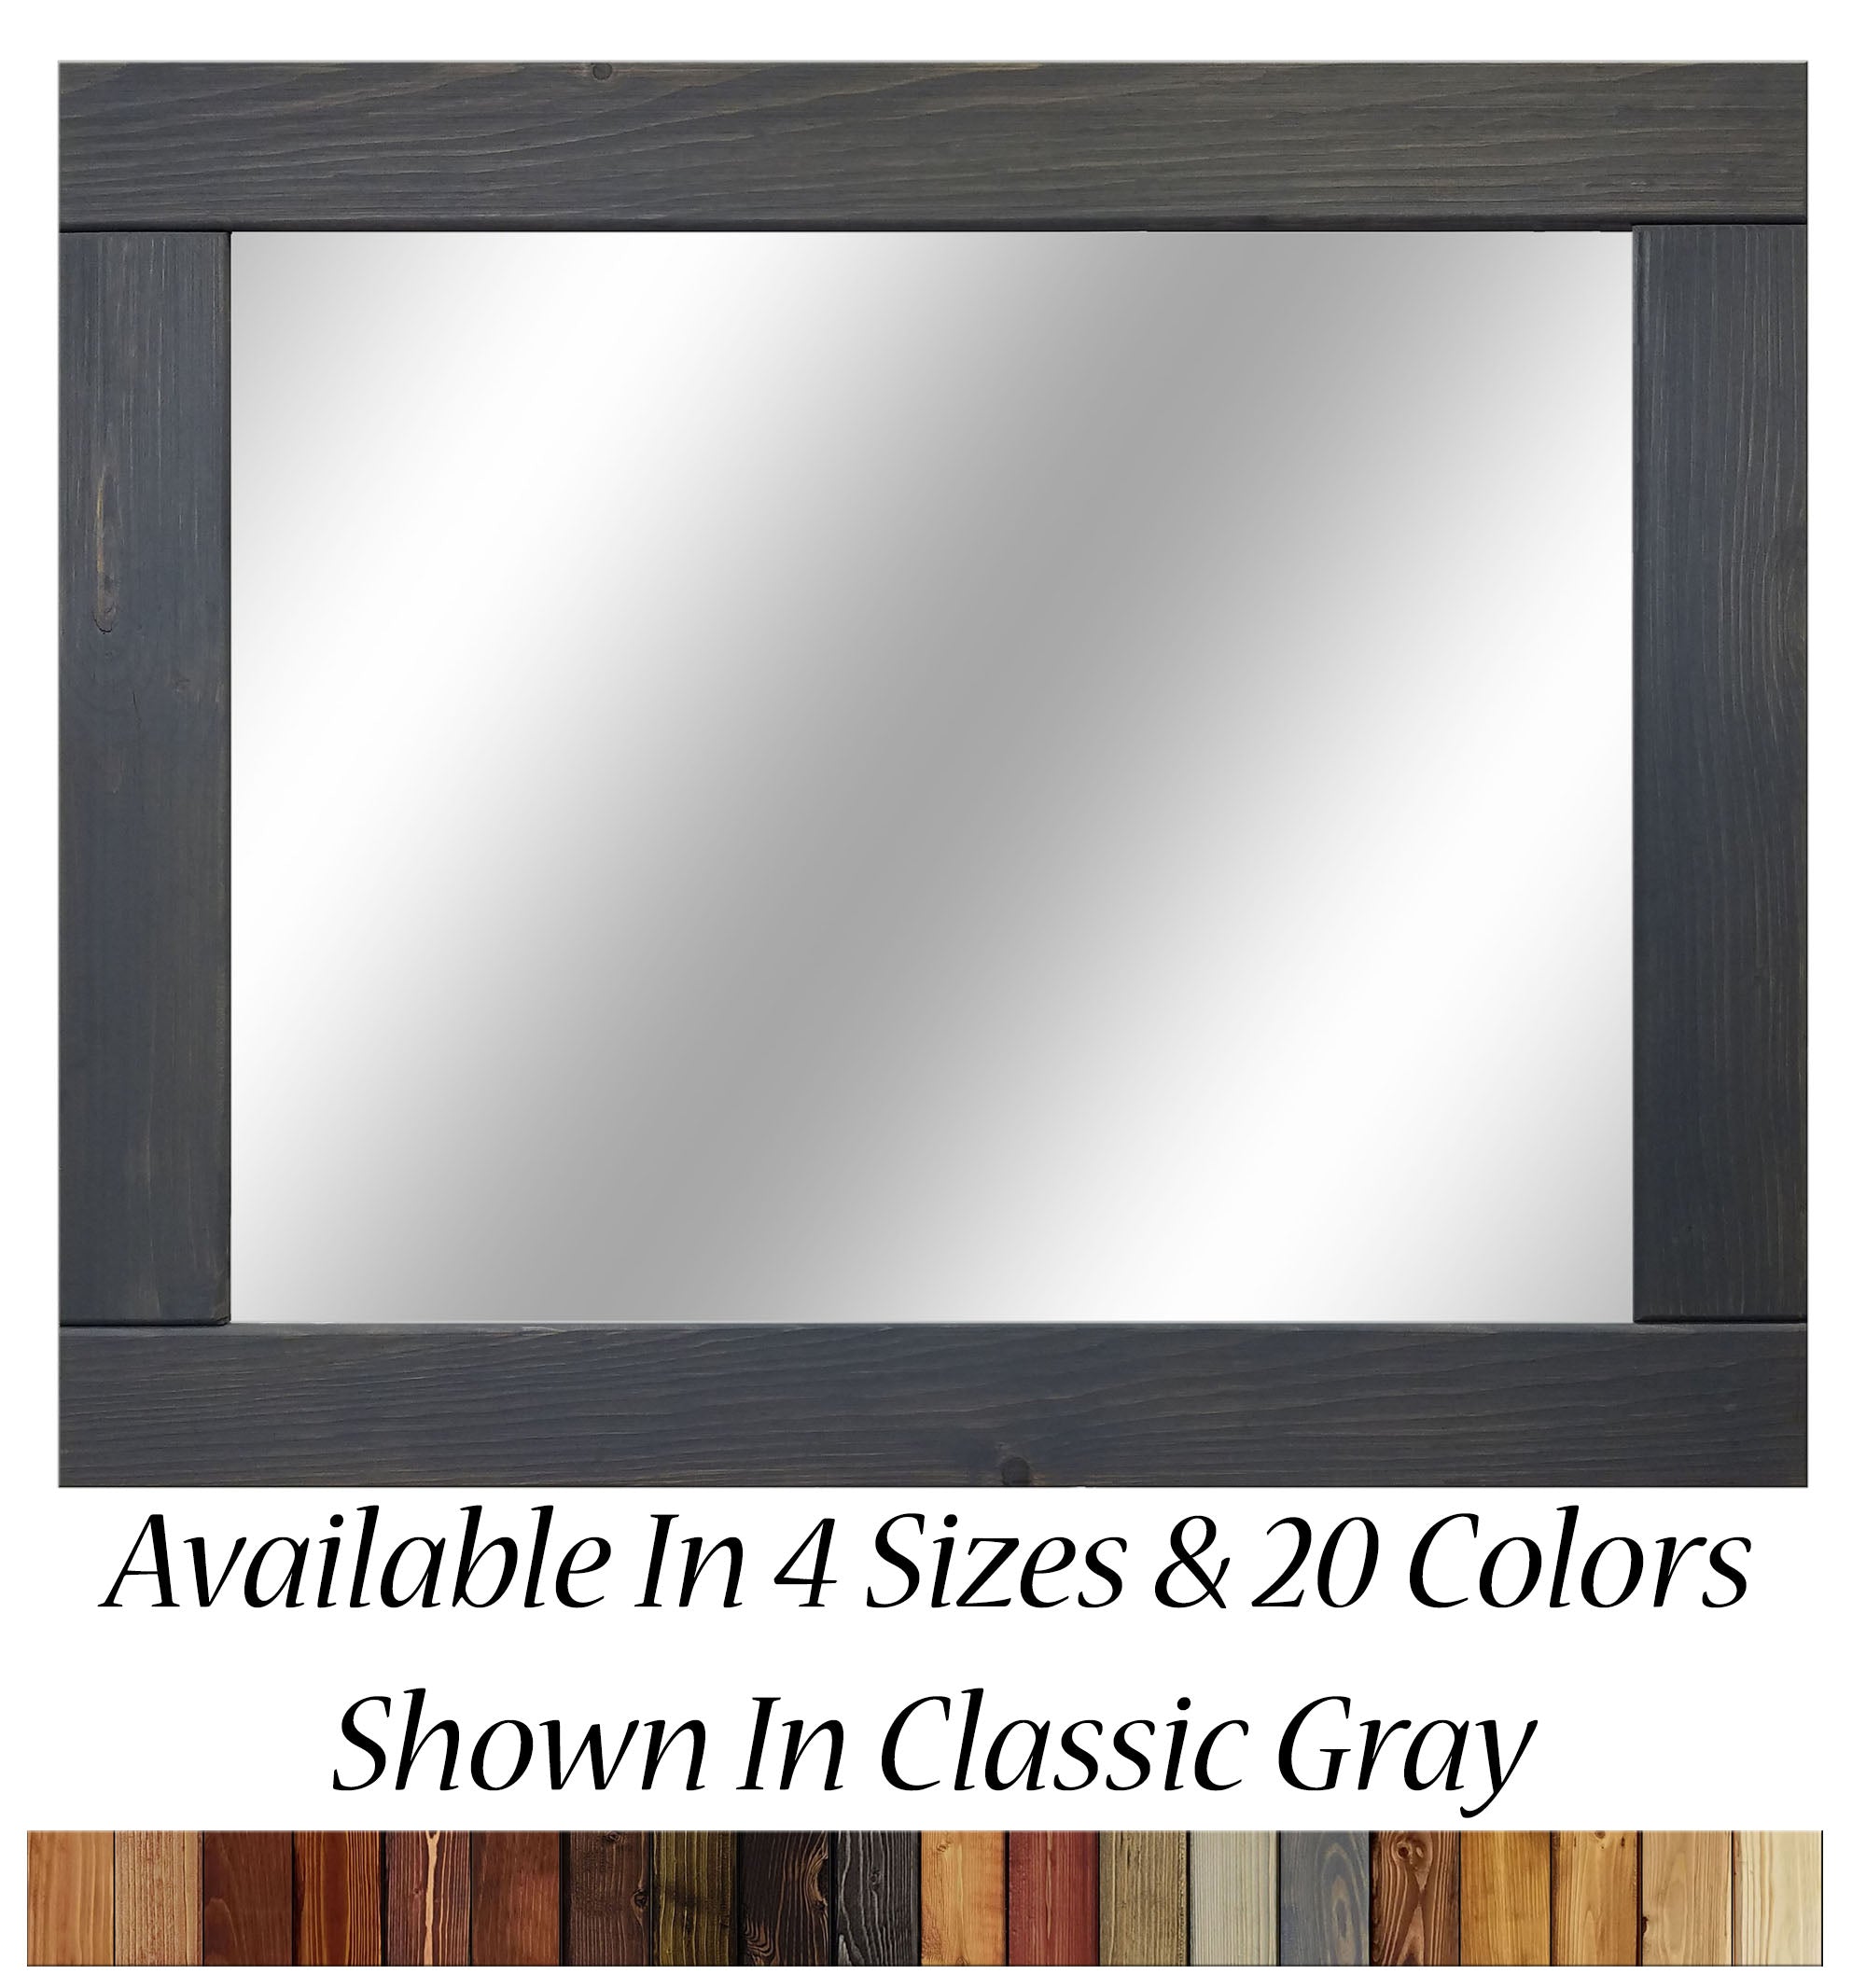 Natural Rustic Wood Framed Mirror, 20 Stain Colors - Shown In Classic Gray